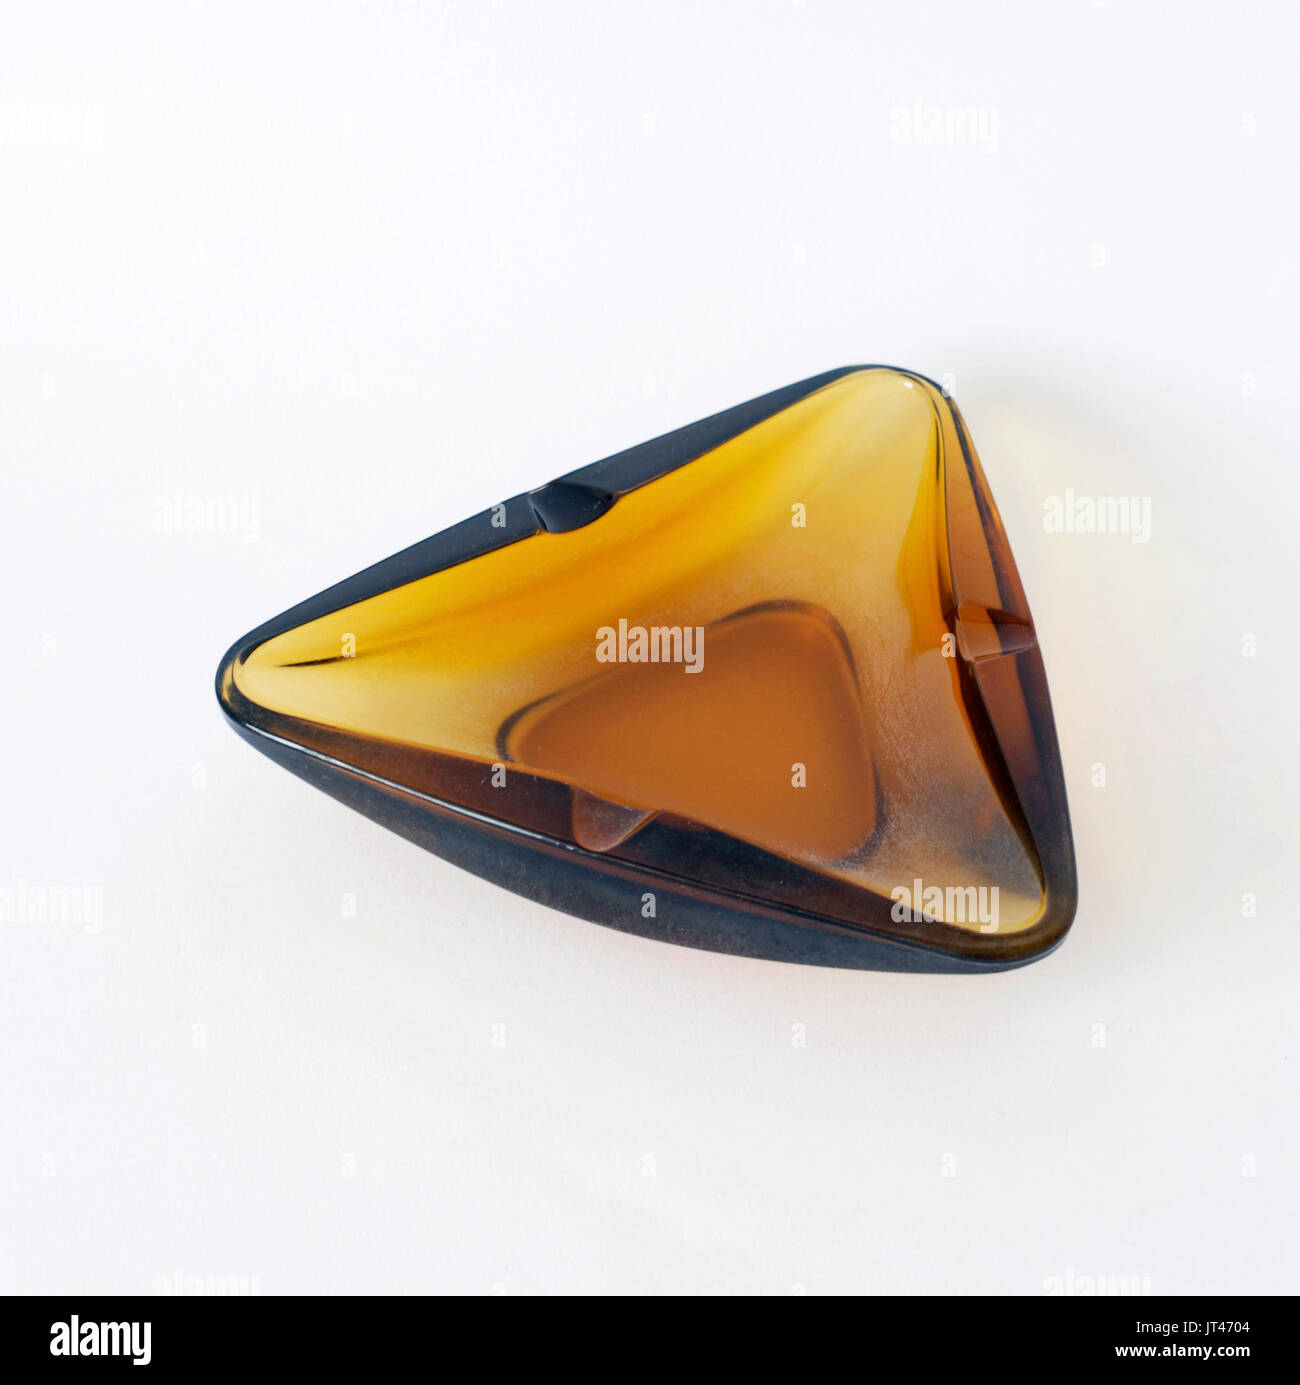 Triangular vintage ashtray amber color triangular. Original from the 60s or 70s Design Stock Photo